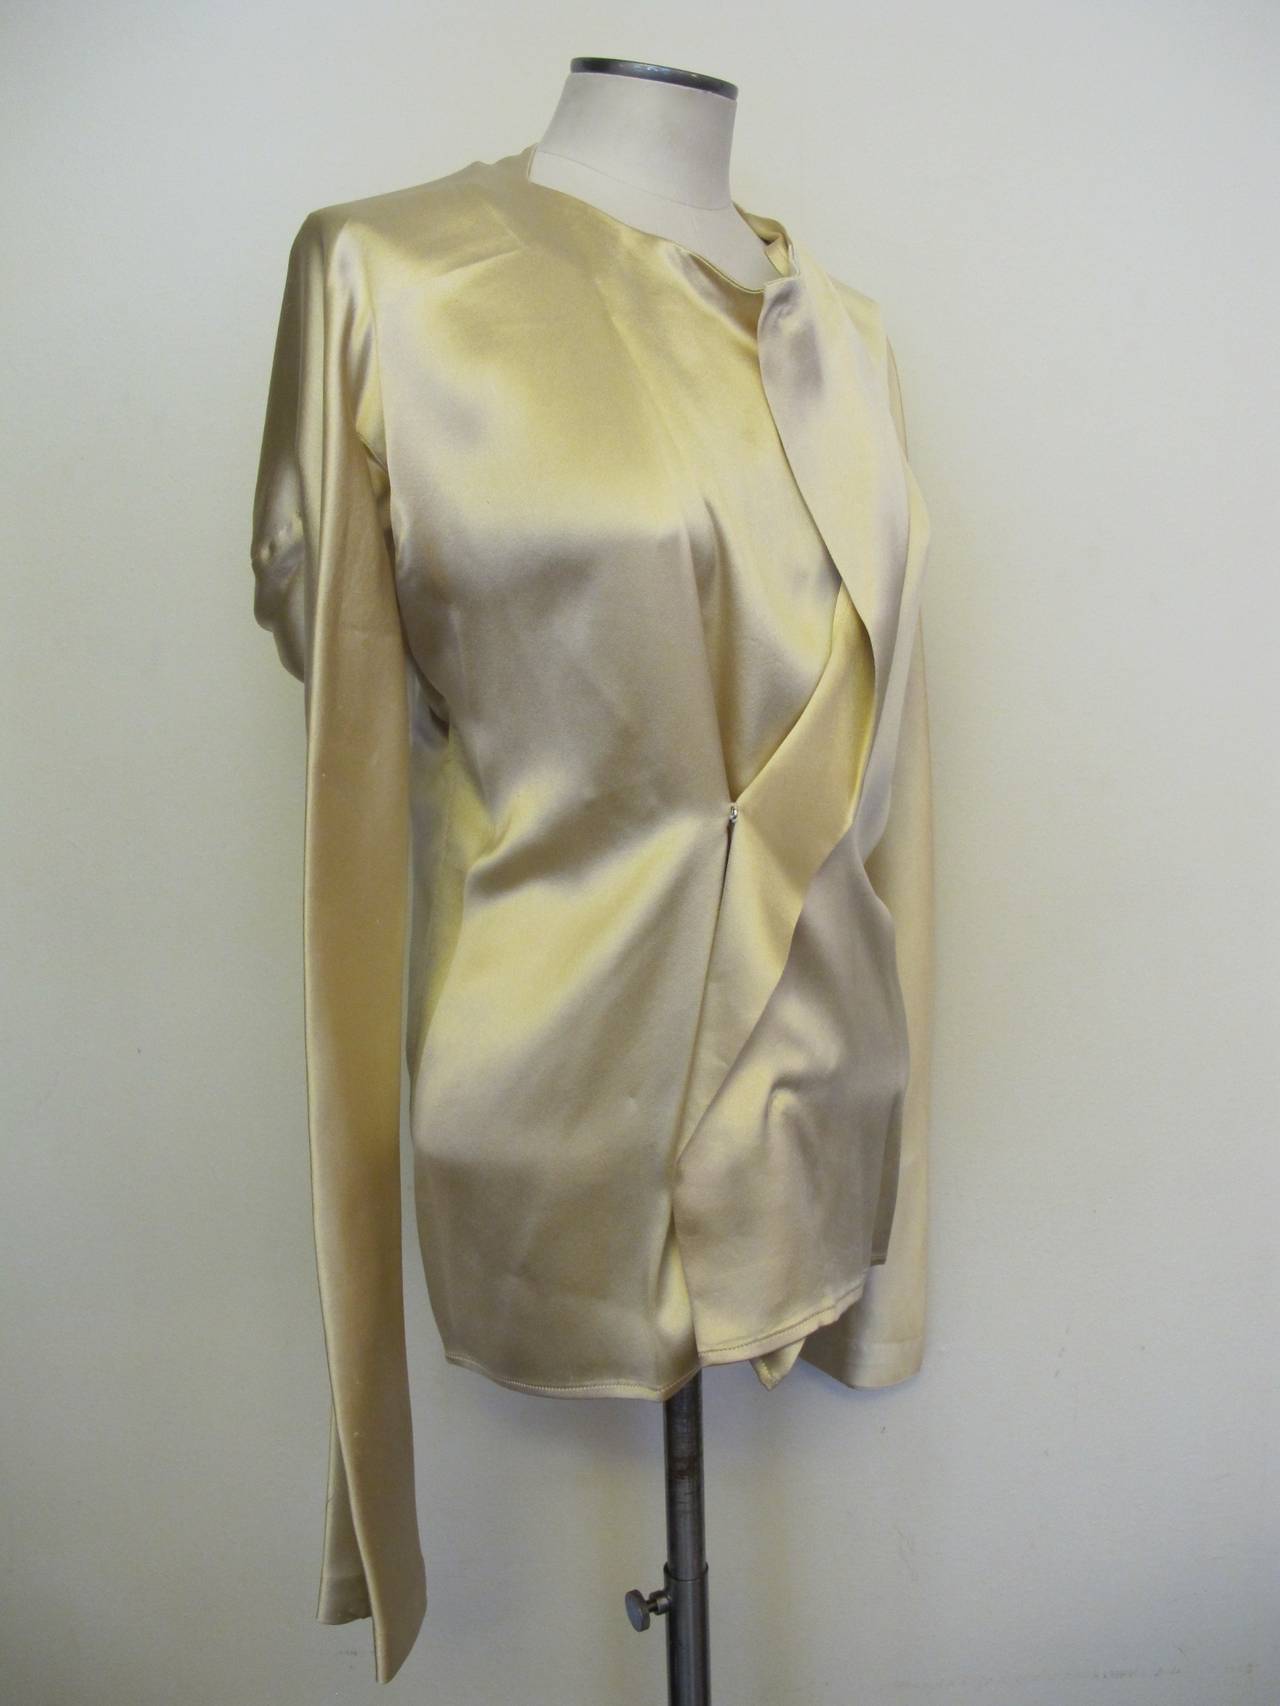 This is an extraordinary impressive silk satin blouse from the collection of the former fashion director of Saks Fifth Avenue. It has a continuous sleeve measuring 72 inches total for both sleeves. The front of the blouse is opened and the top is